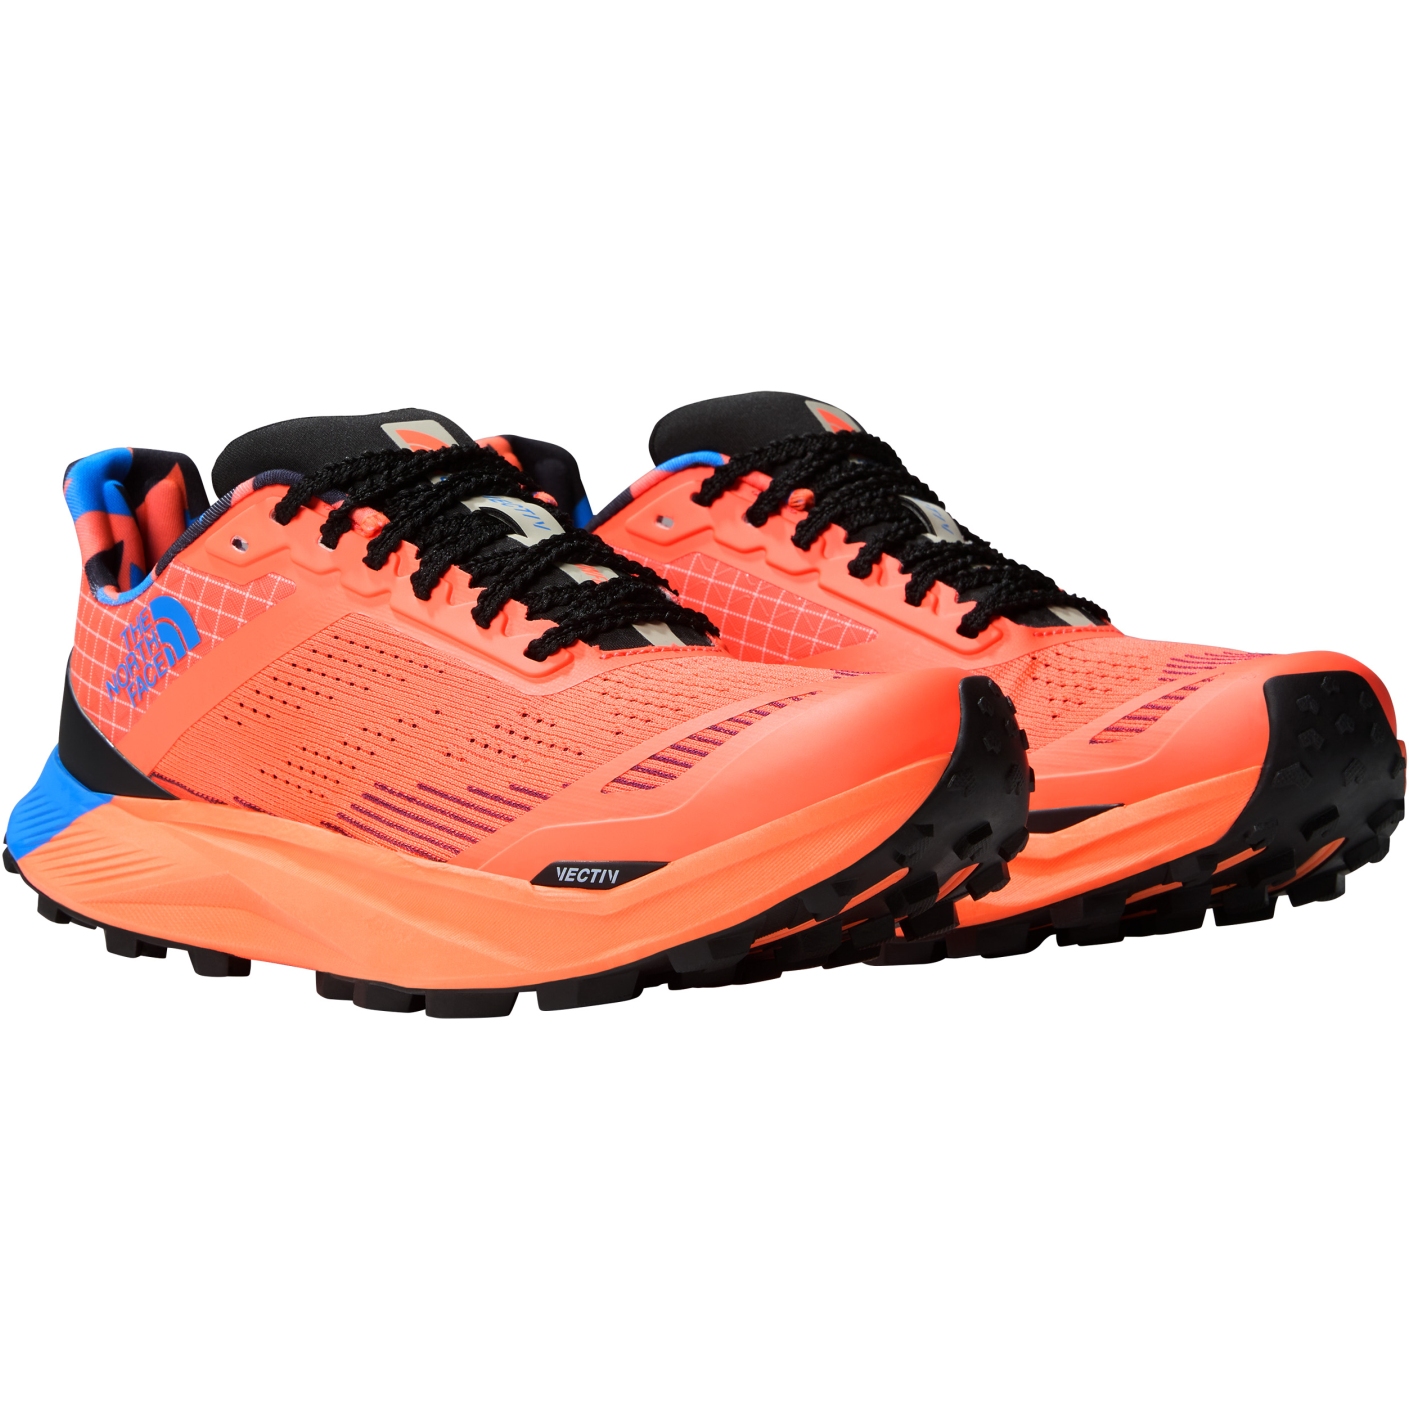 The North Face Women's VECTIV™ Infinite II Athlete Trail Running Shoes ...